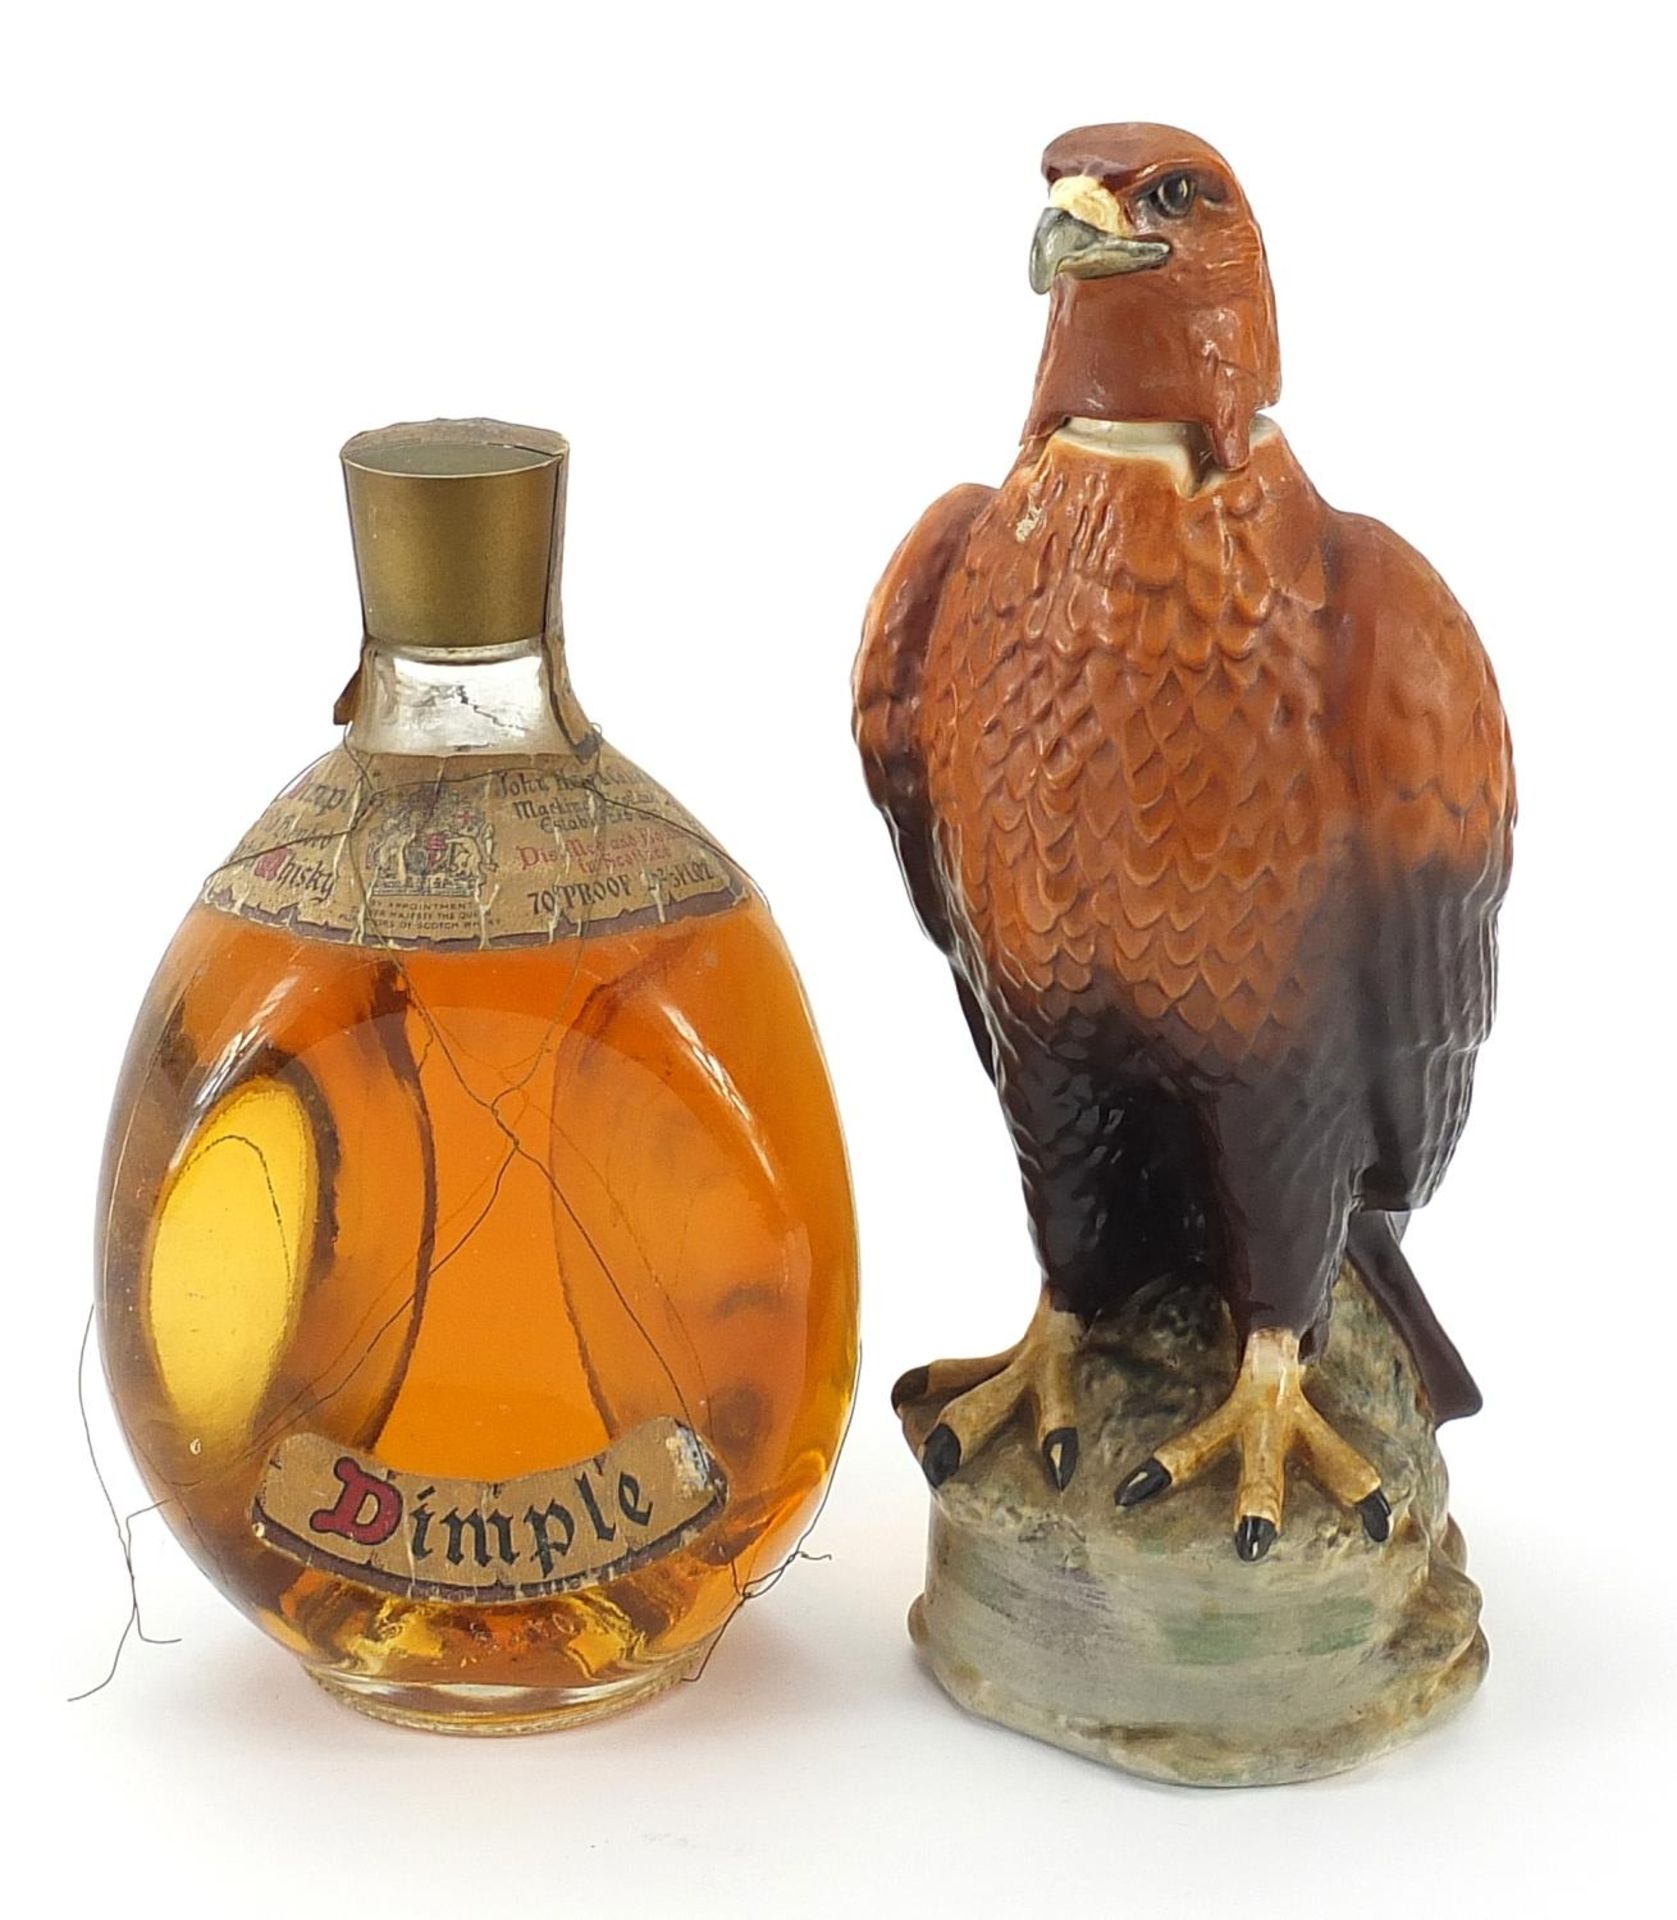 Bottle of Haig Dimple Scotch whiskey and a Beswick Golden Eagle decanter